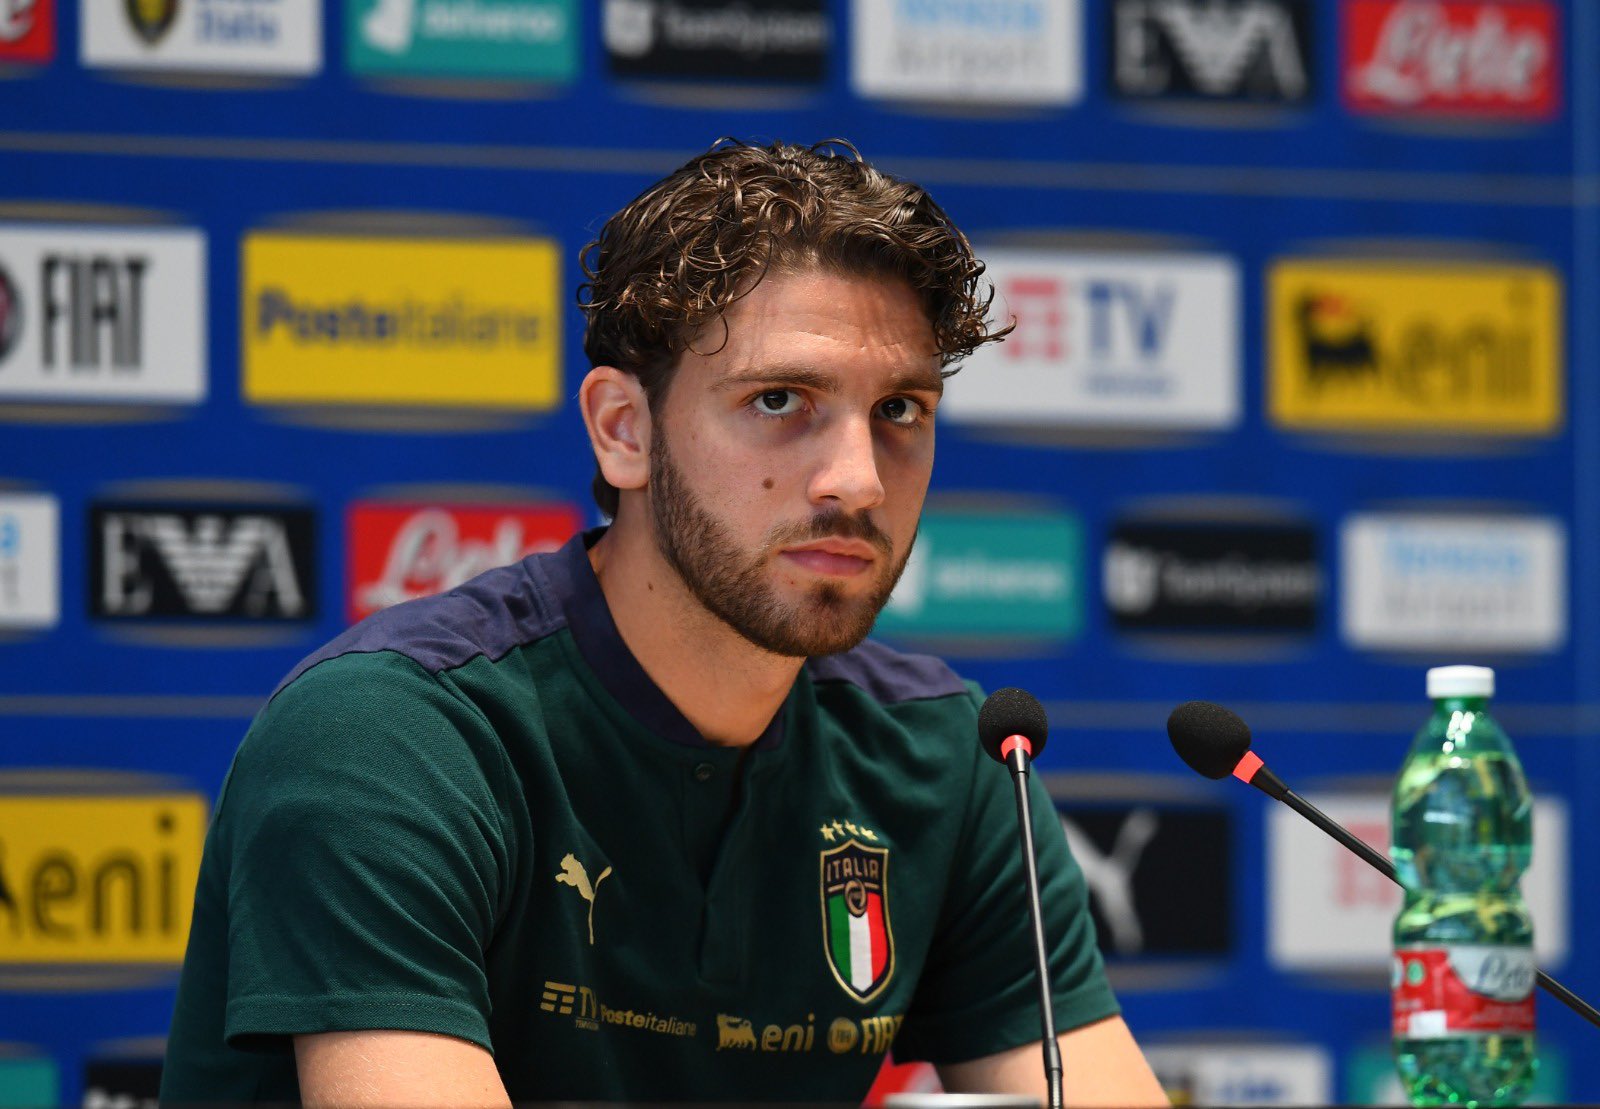 Manuel Locatelli wants to join Juventus but they need to pay right fee, reveals Giovanni Carnevali